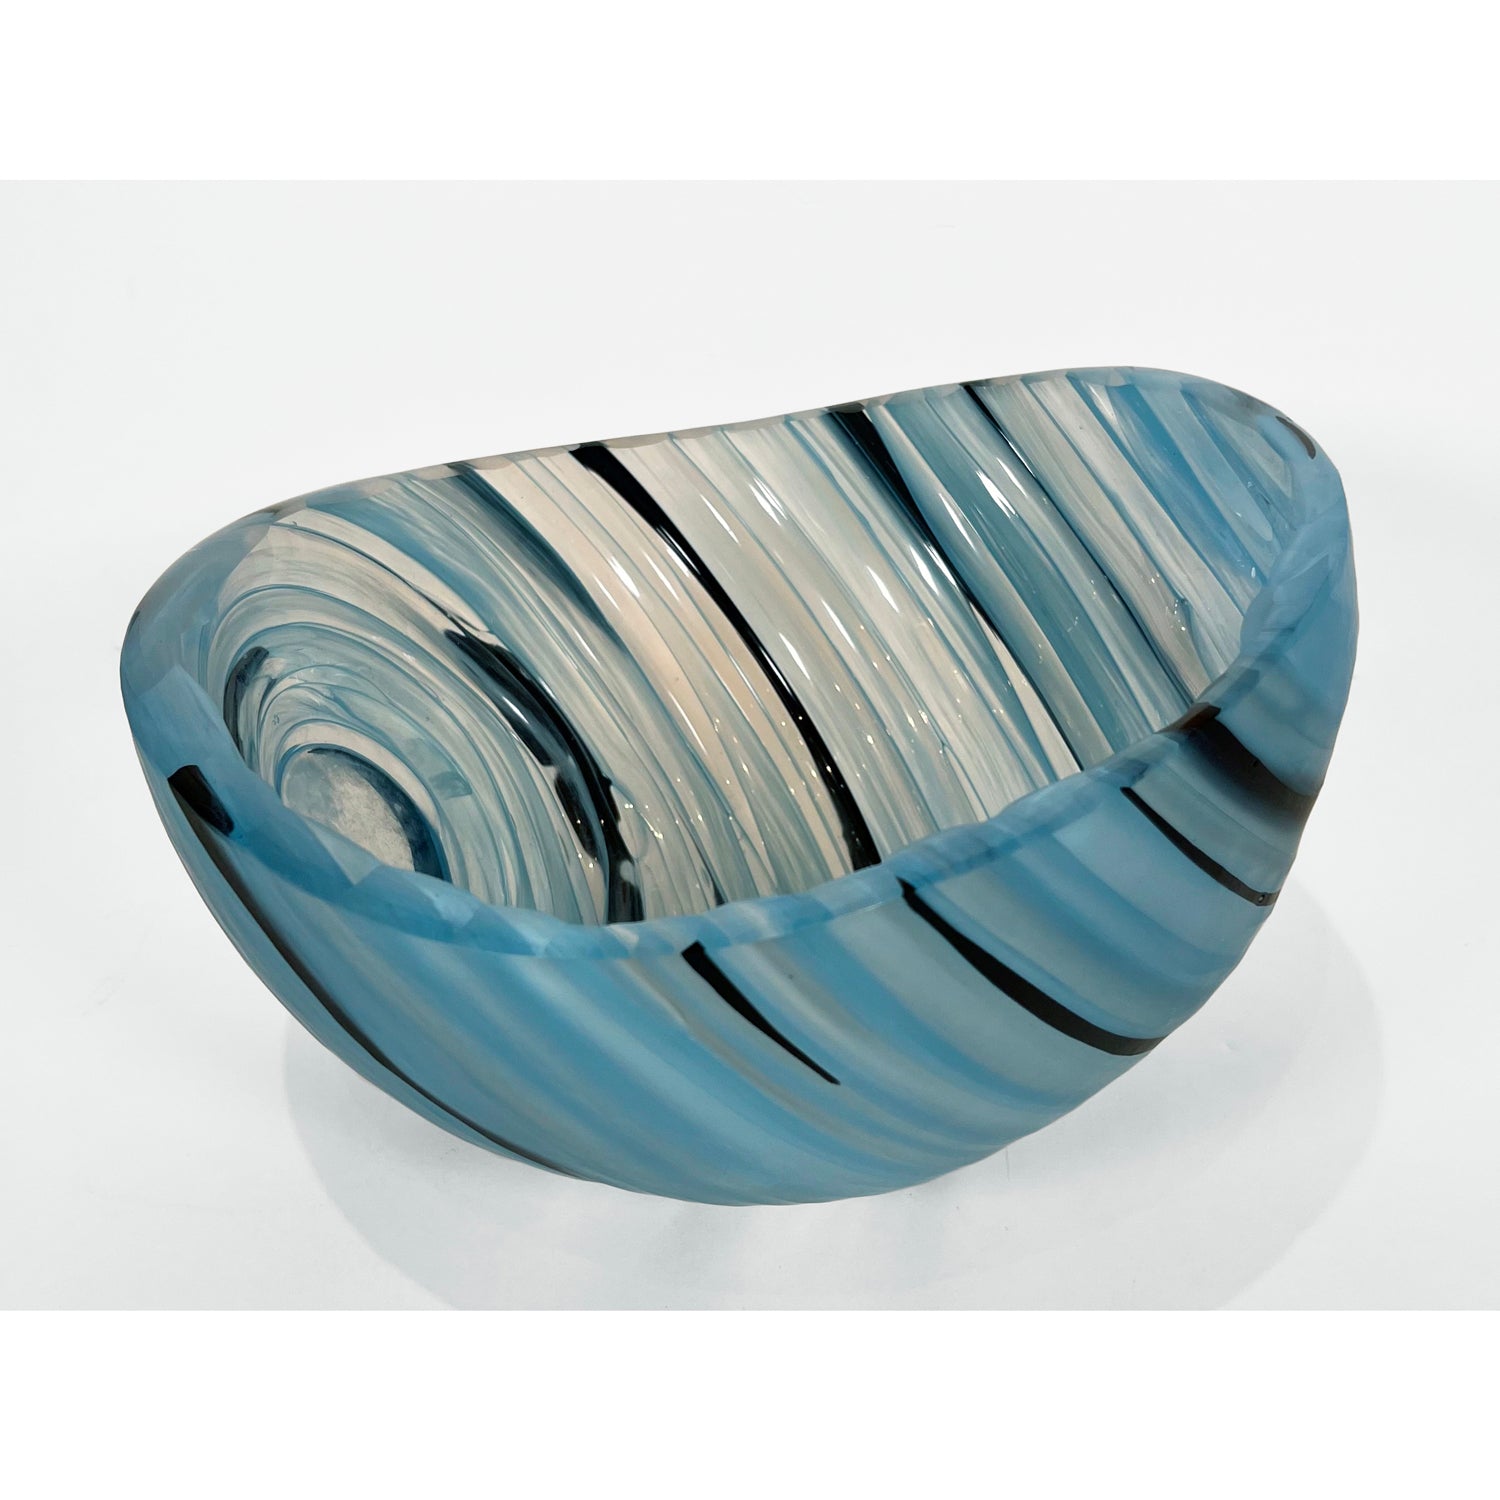 Jaan Andres - Coded Bowl Blue/Black Large, 6" x 10" x 10"